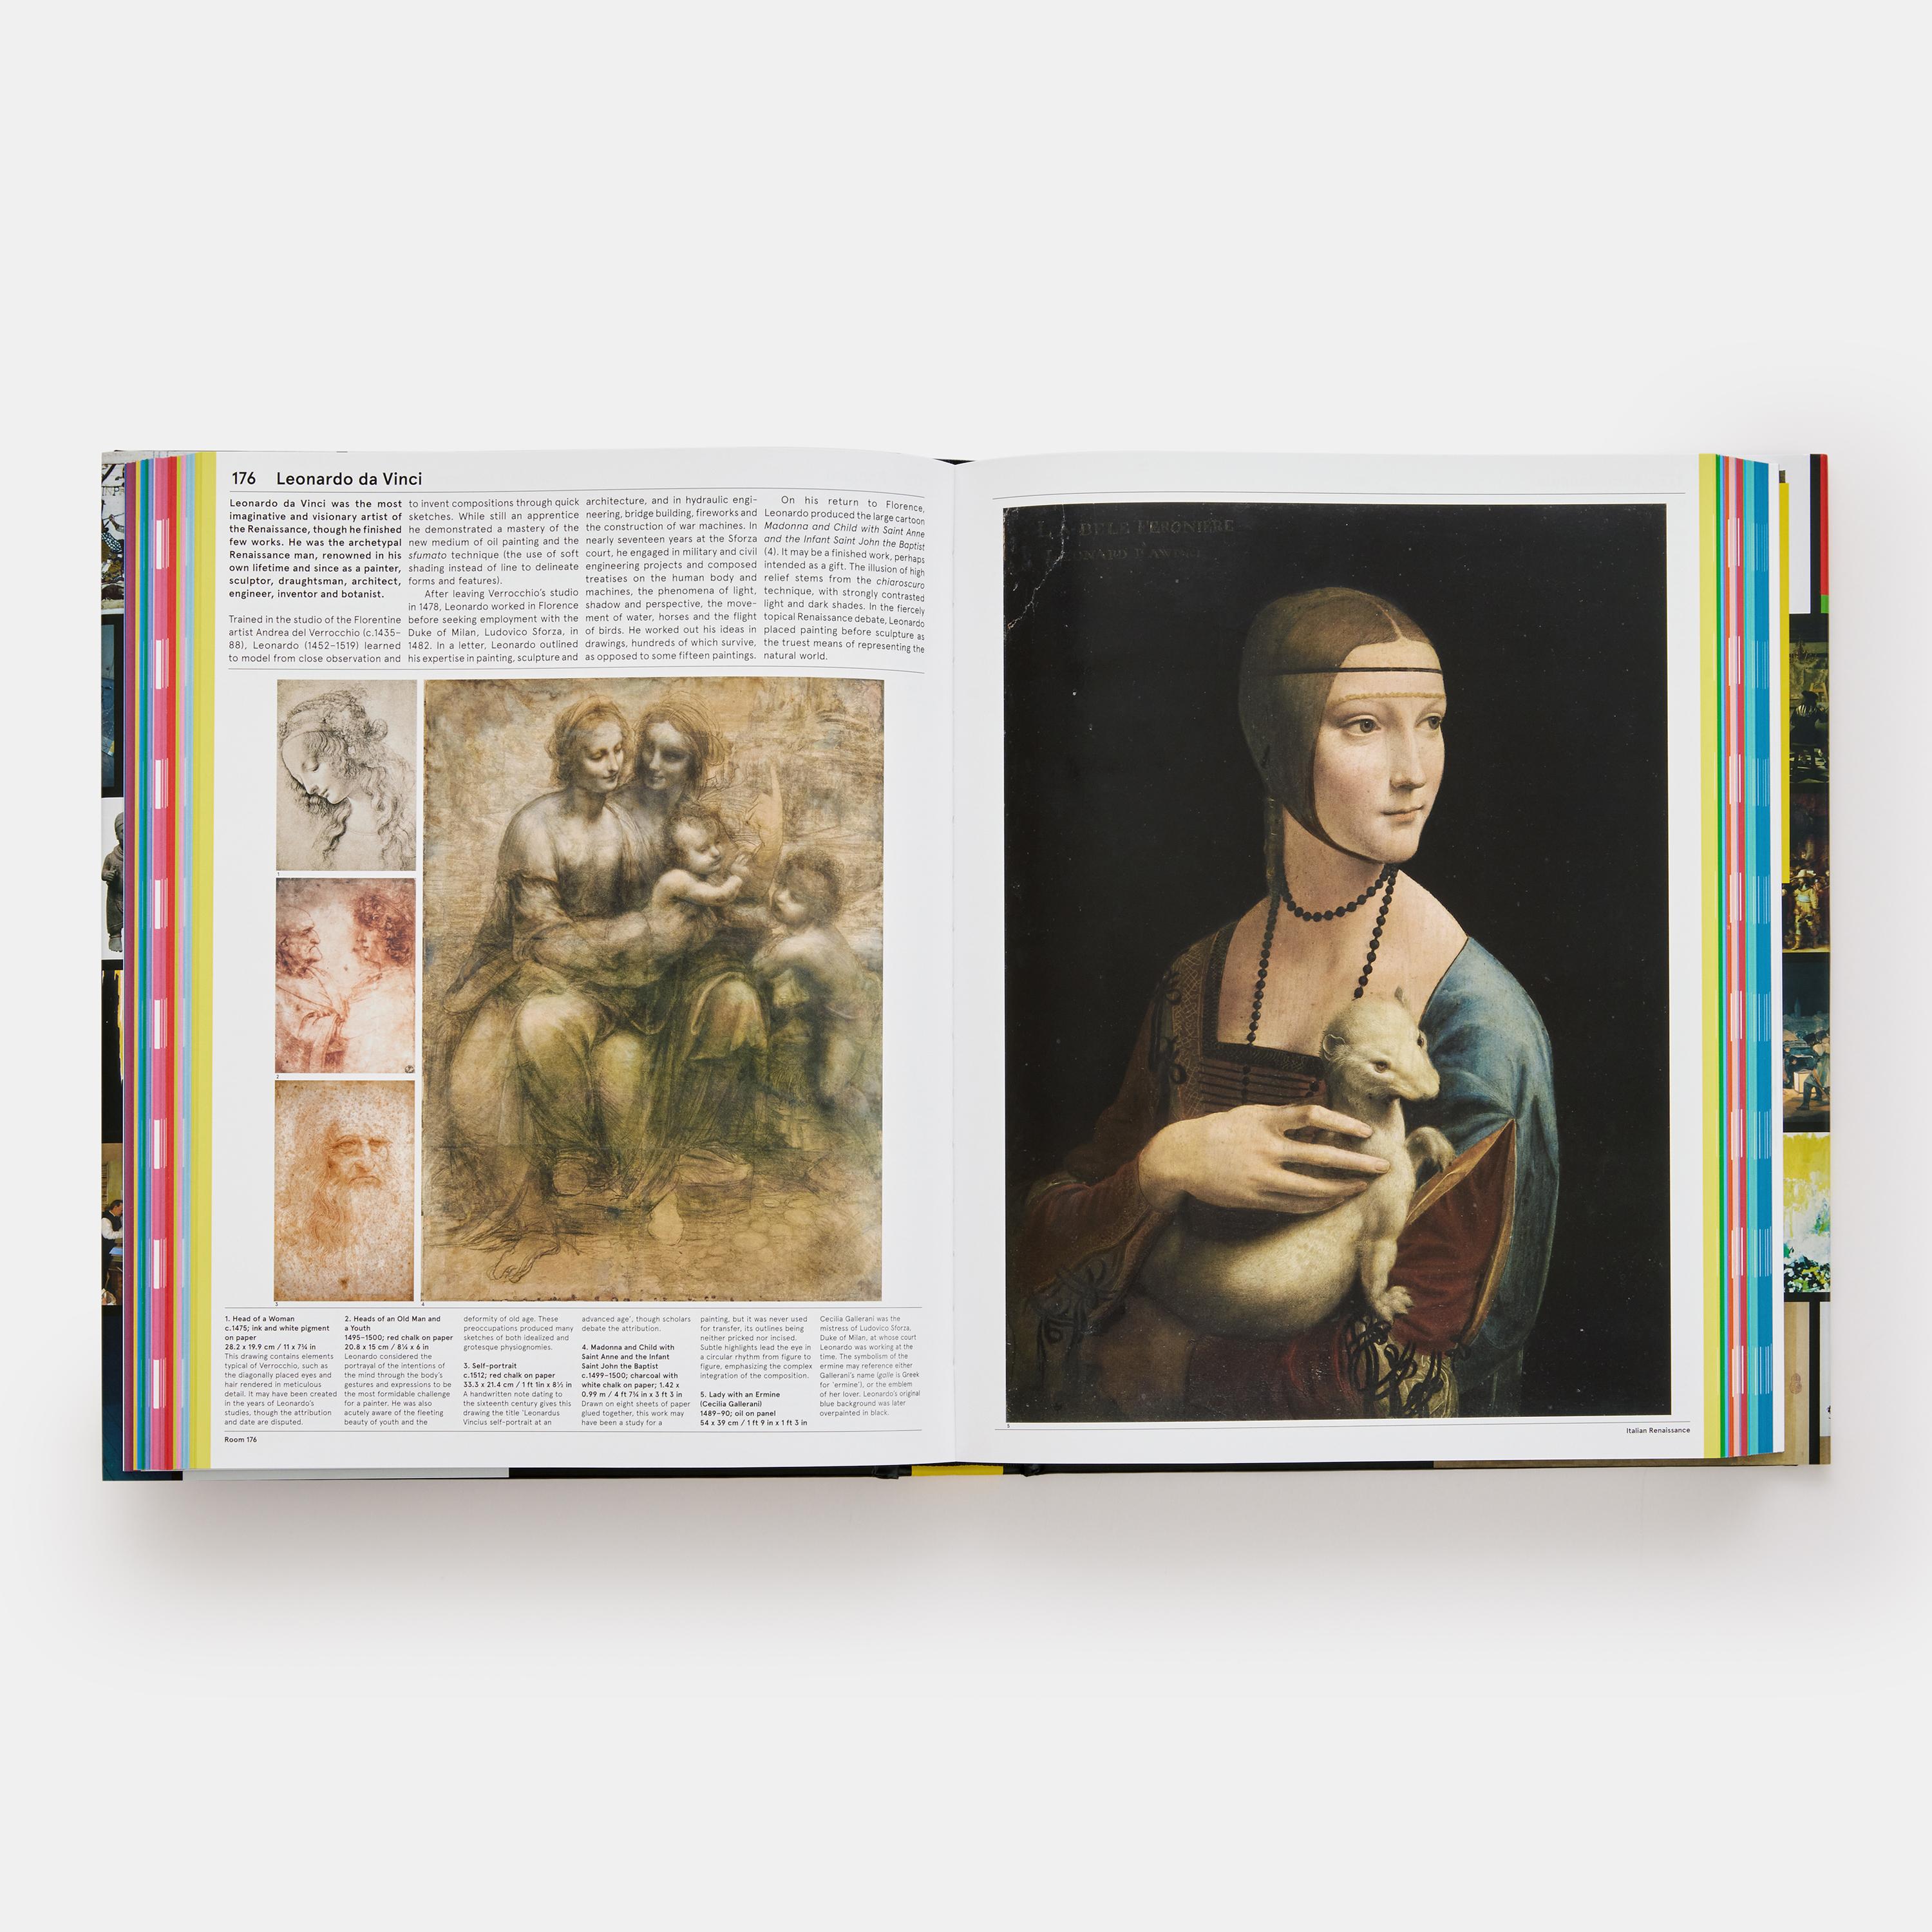 Visit the world’s most comprehensive and compelling museum in a single book – the ultimate gallery in your own home

Housing the finest art collection ever assembled, this classic format of Phaidon’s bestselling The Art Museum offers the ultimate